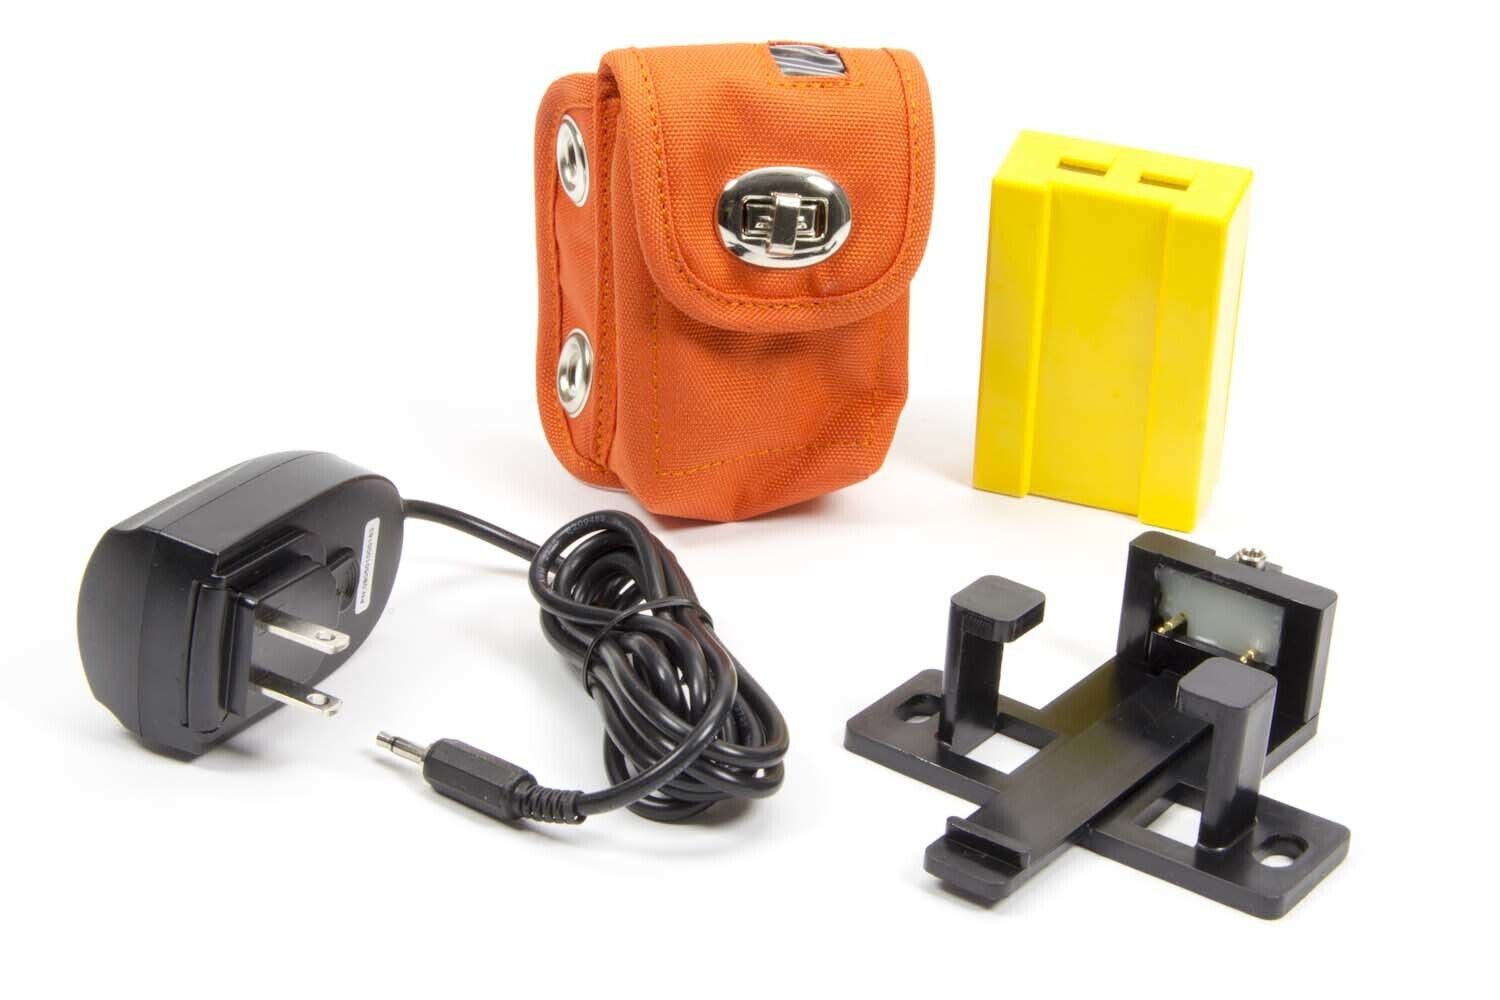 Raceceiver Txpkg01 Transponder Package W/ Mnt. Pouch & Charger